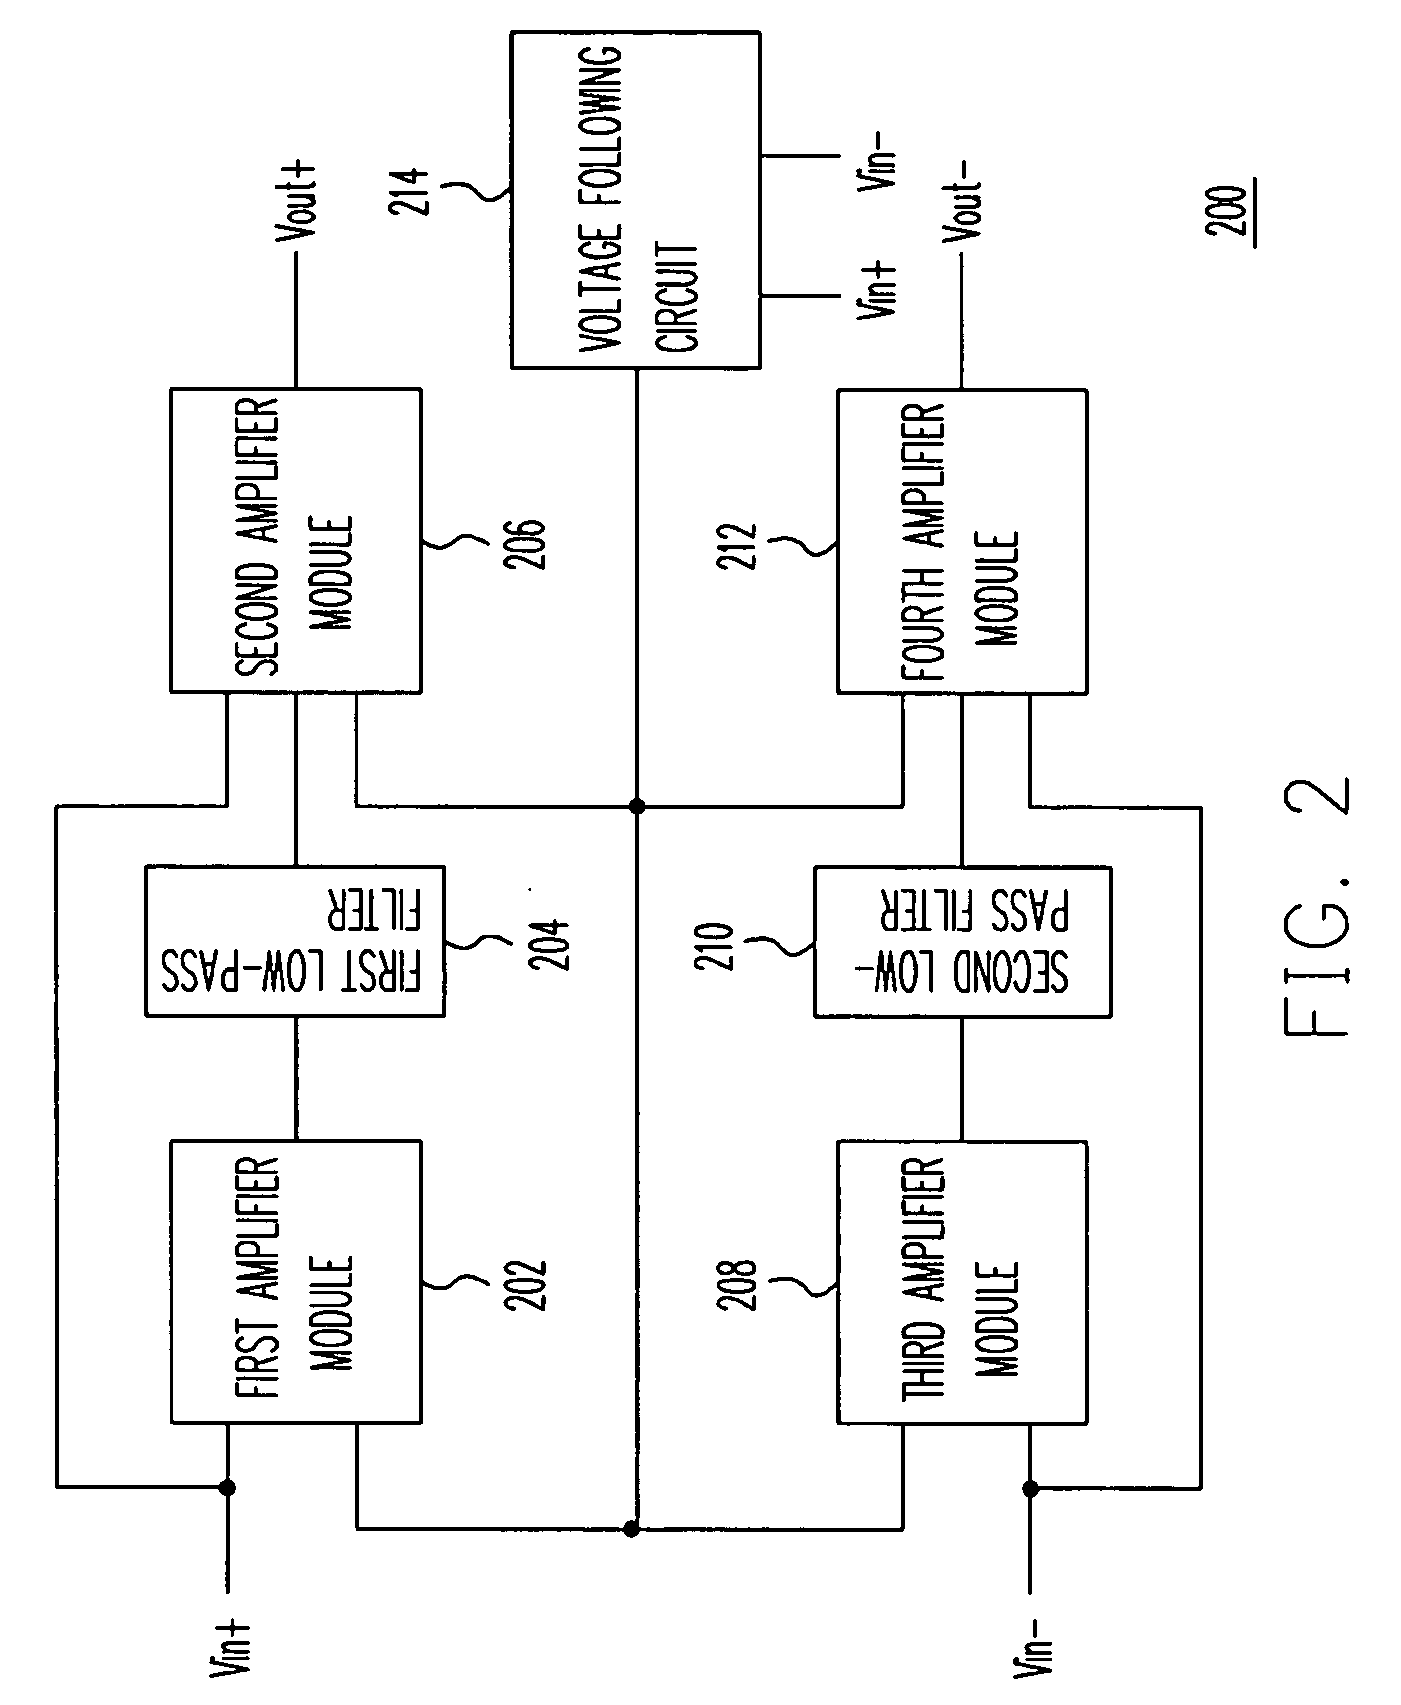 Apparatus for removing DC offset and amplifying signal with variable gain simutaneously